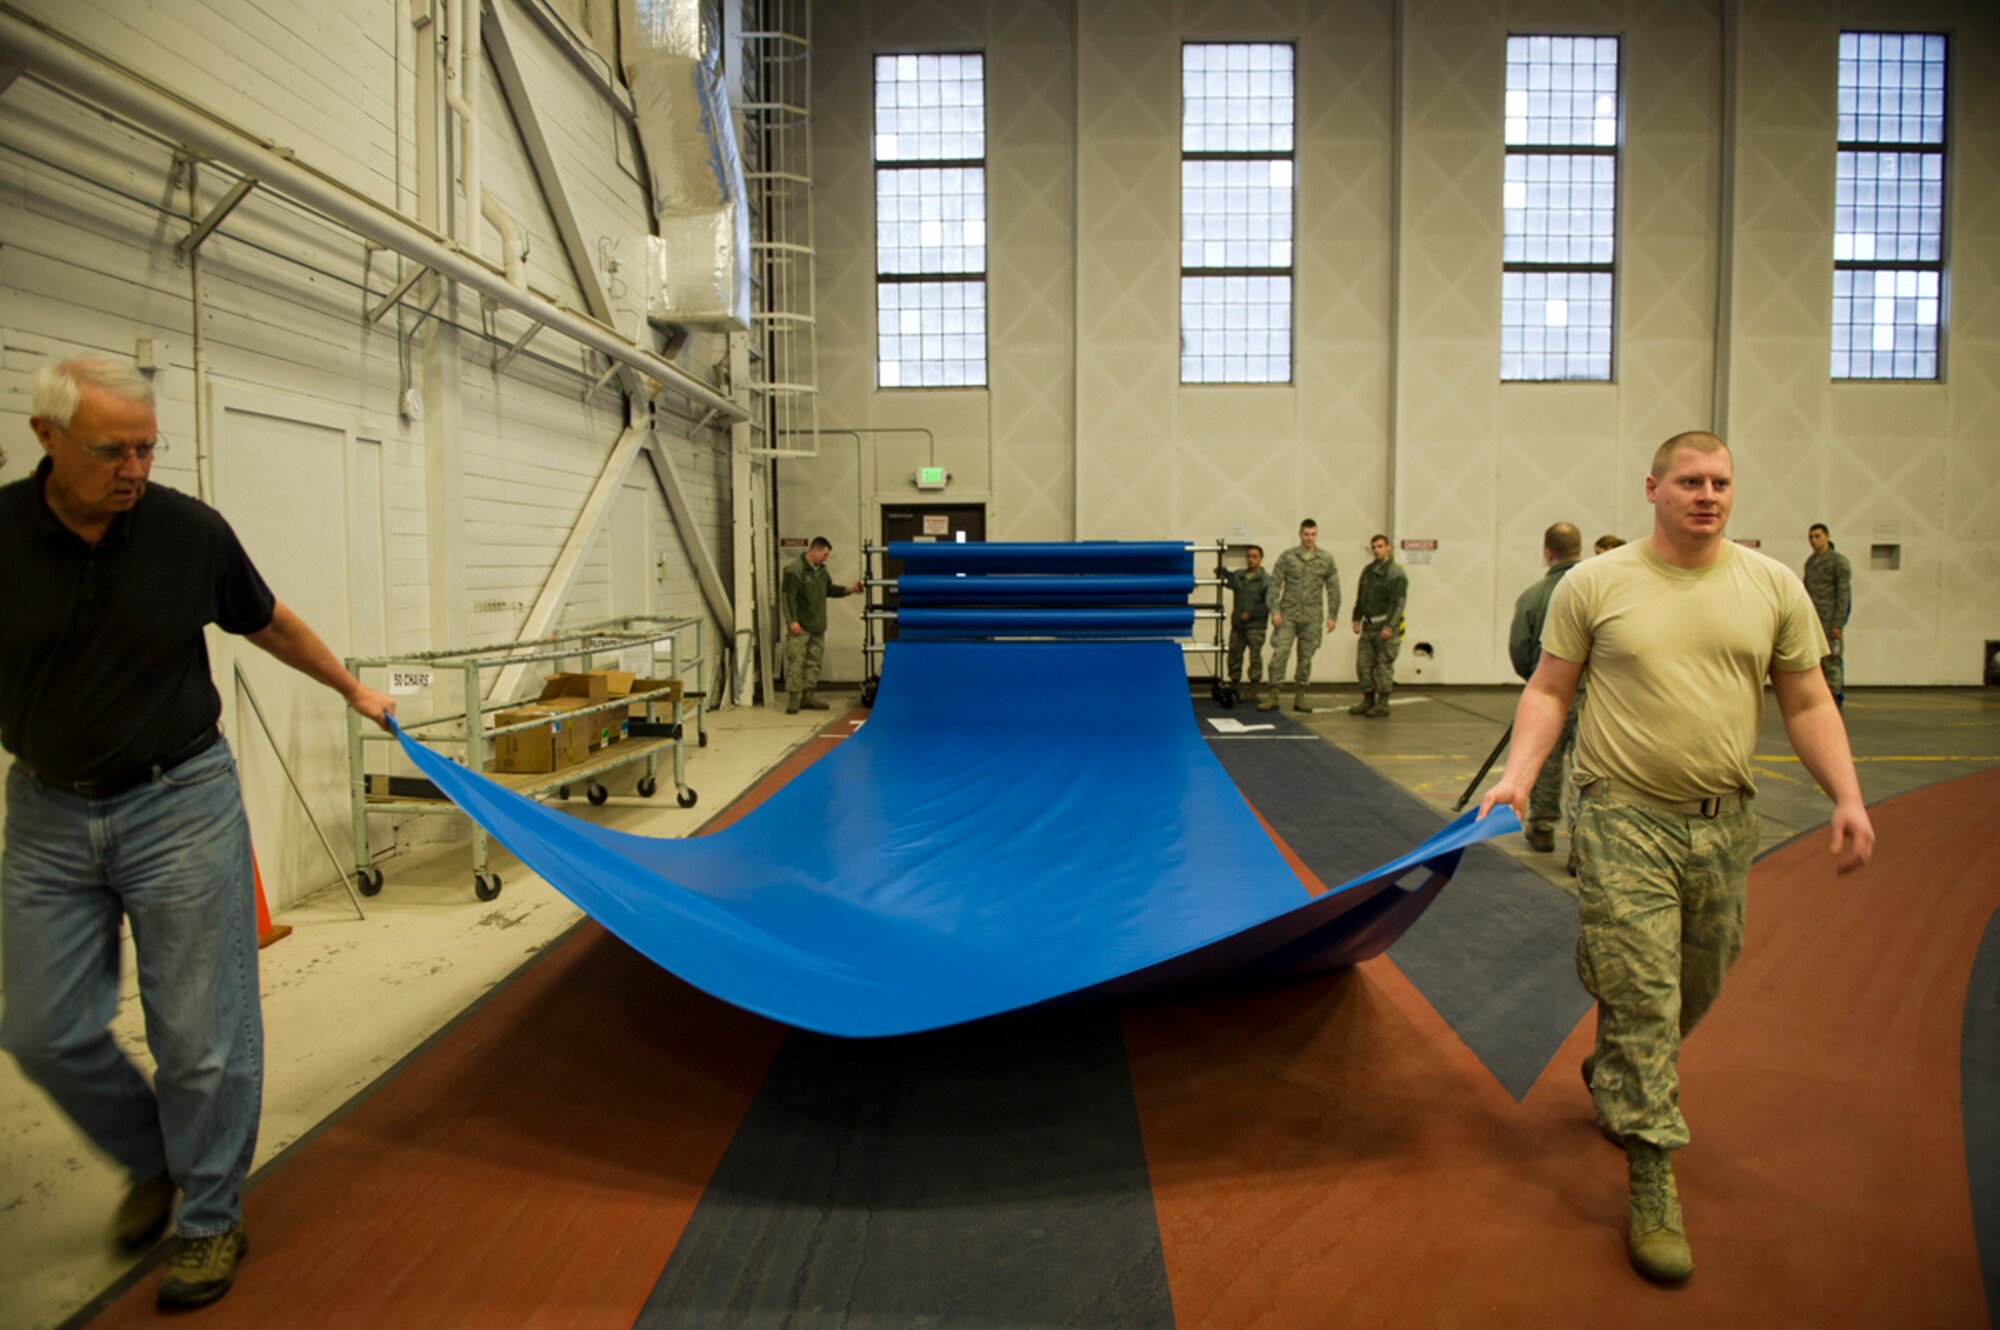 Thomas Lawson, director of the JBER-Elmendorf Fitness Center for the 673d Force Support Squadron, and Senior Airman Corby Wilson, 673d Communications Squadron radio frequency transmission systems journeyman, roll out a tarp to protect the indoor track at Hangar 5 on Joint Base Elmendorf-Richardson, Alaska, on March 17, 2014. Volunteers from many JBER units prepared temporary living quarters for U.S. armed forces in support of exercise Alaska Shield 2014. (U.S. Air Force photo/Airman 1st Class Omari Bernard)